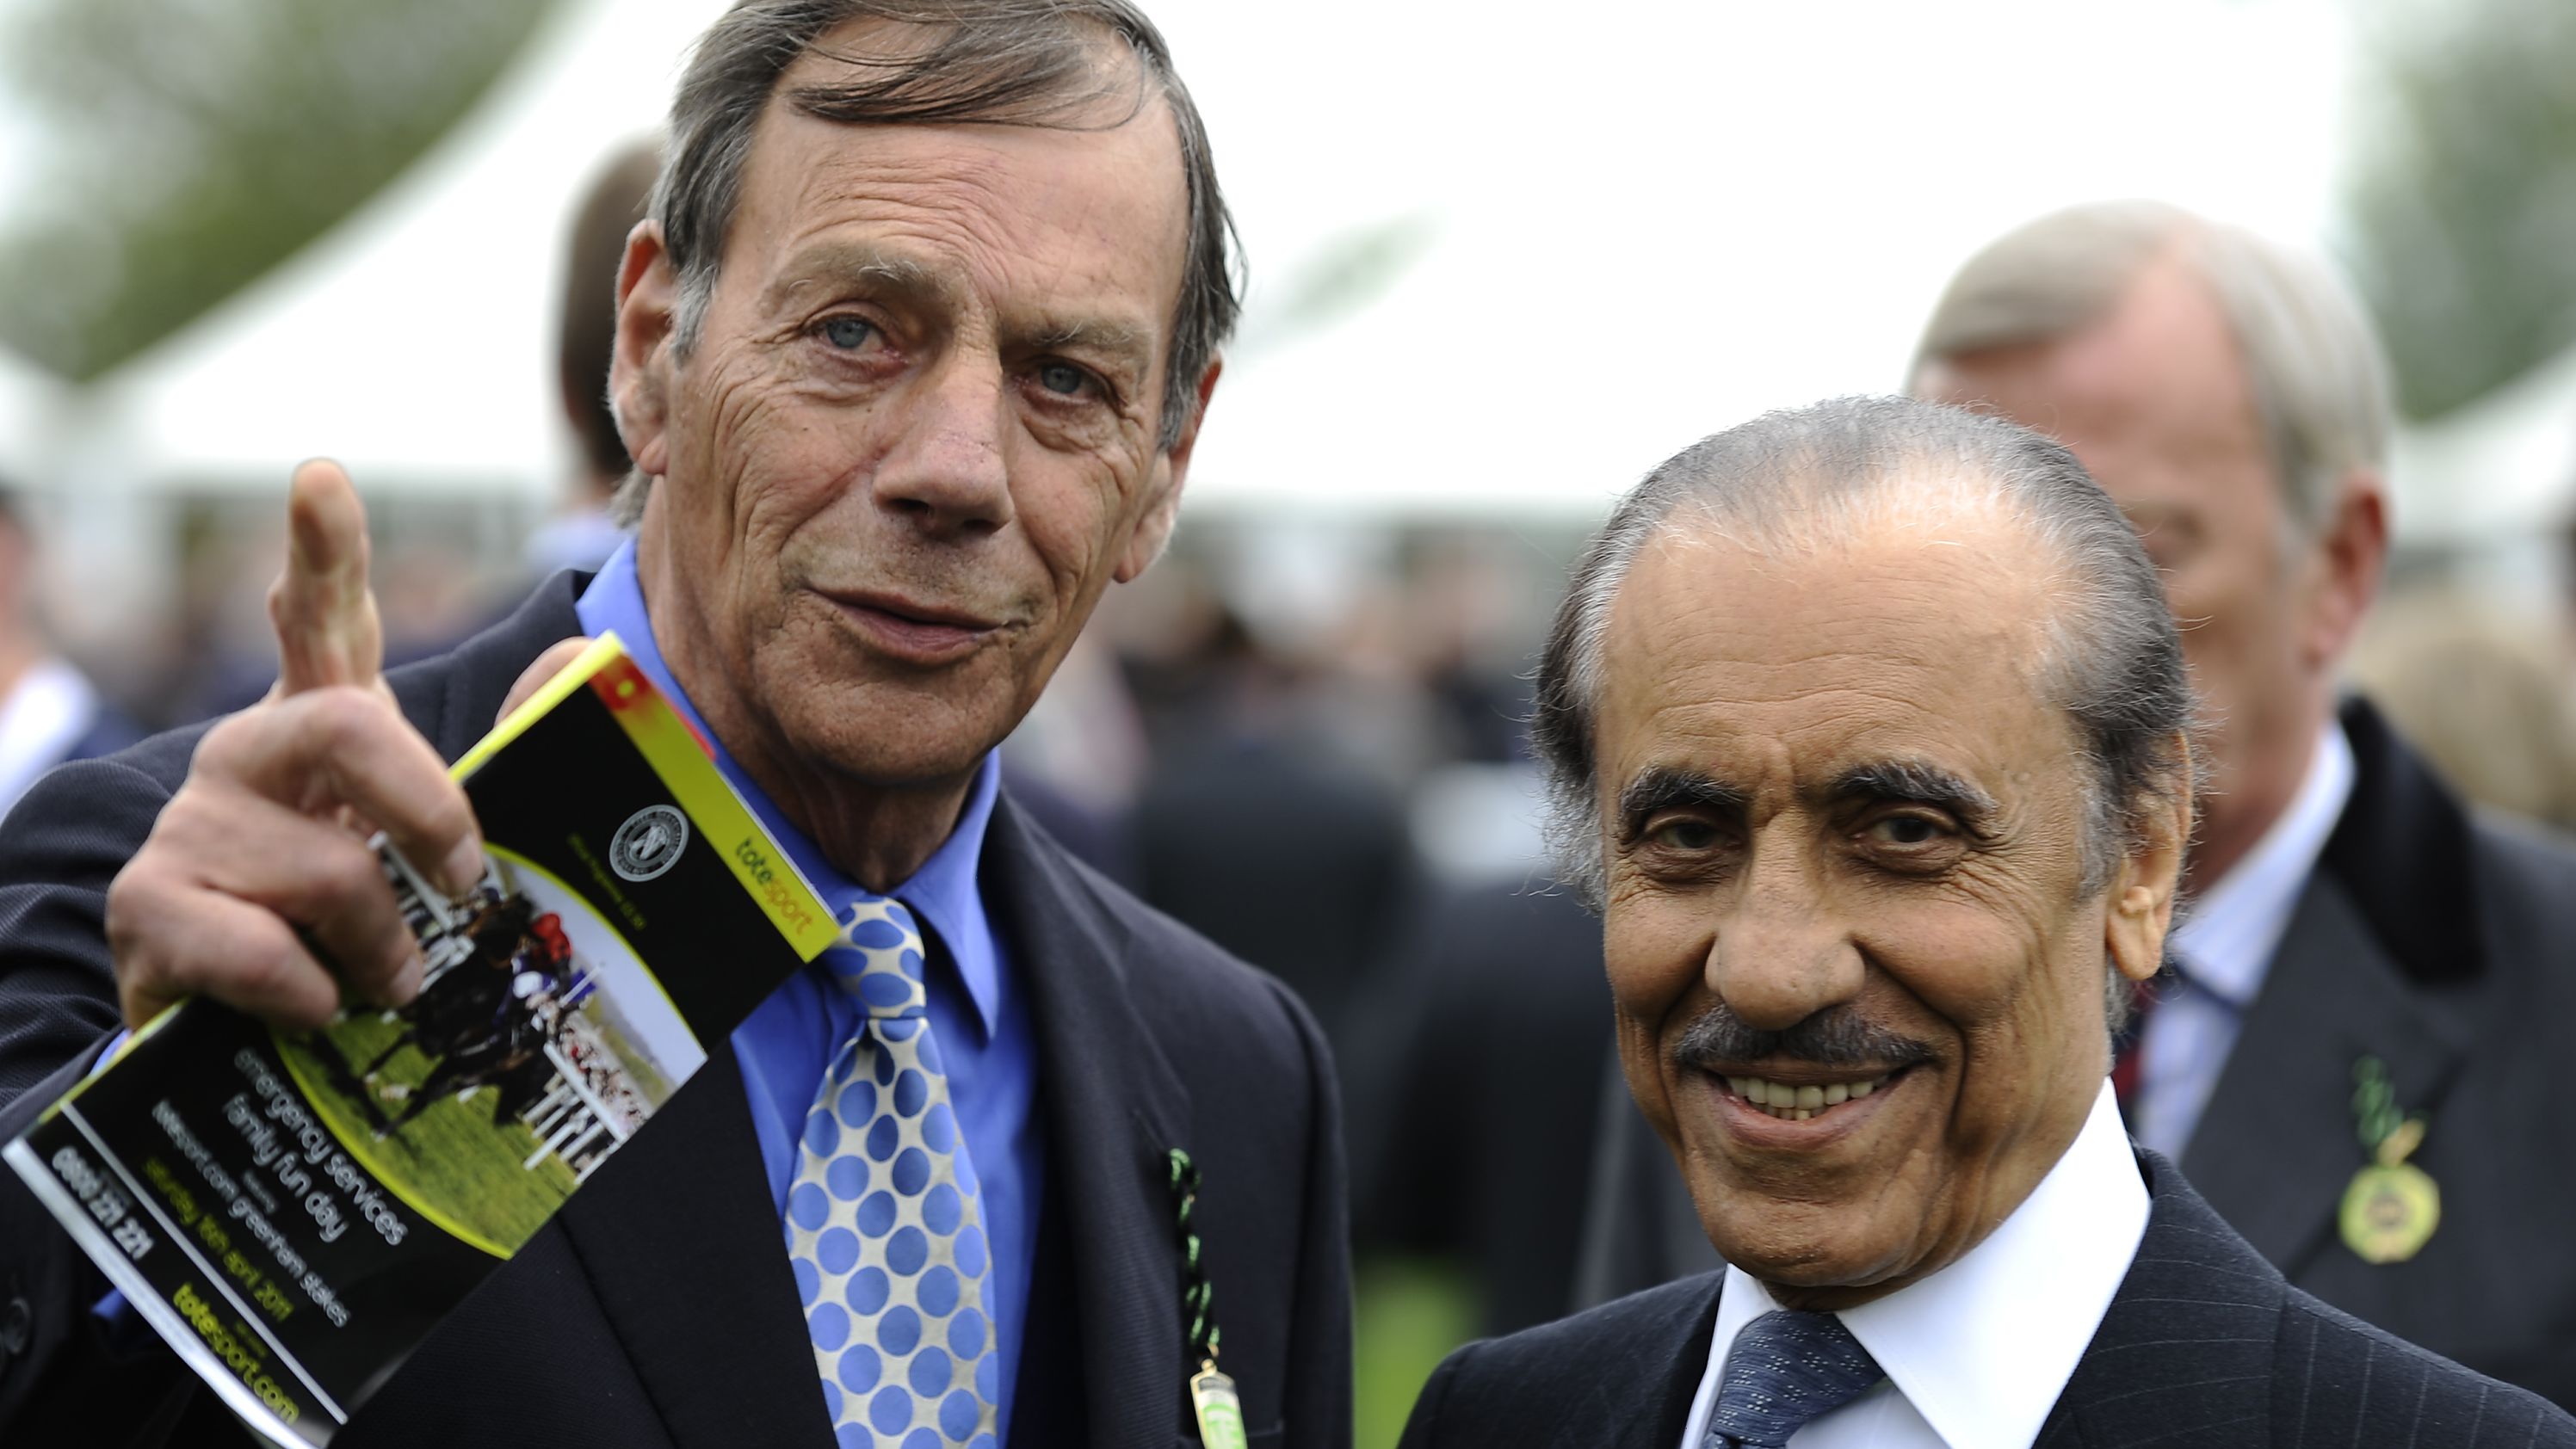 Khalid Abdulla (R) with Frankel's trainer, the late Henry Cecil, in 2011.